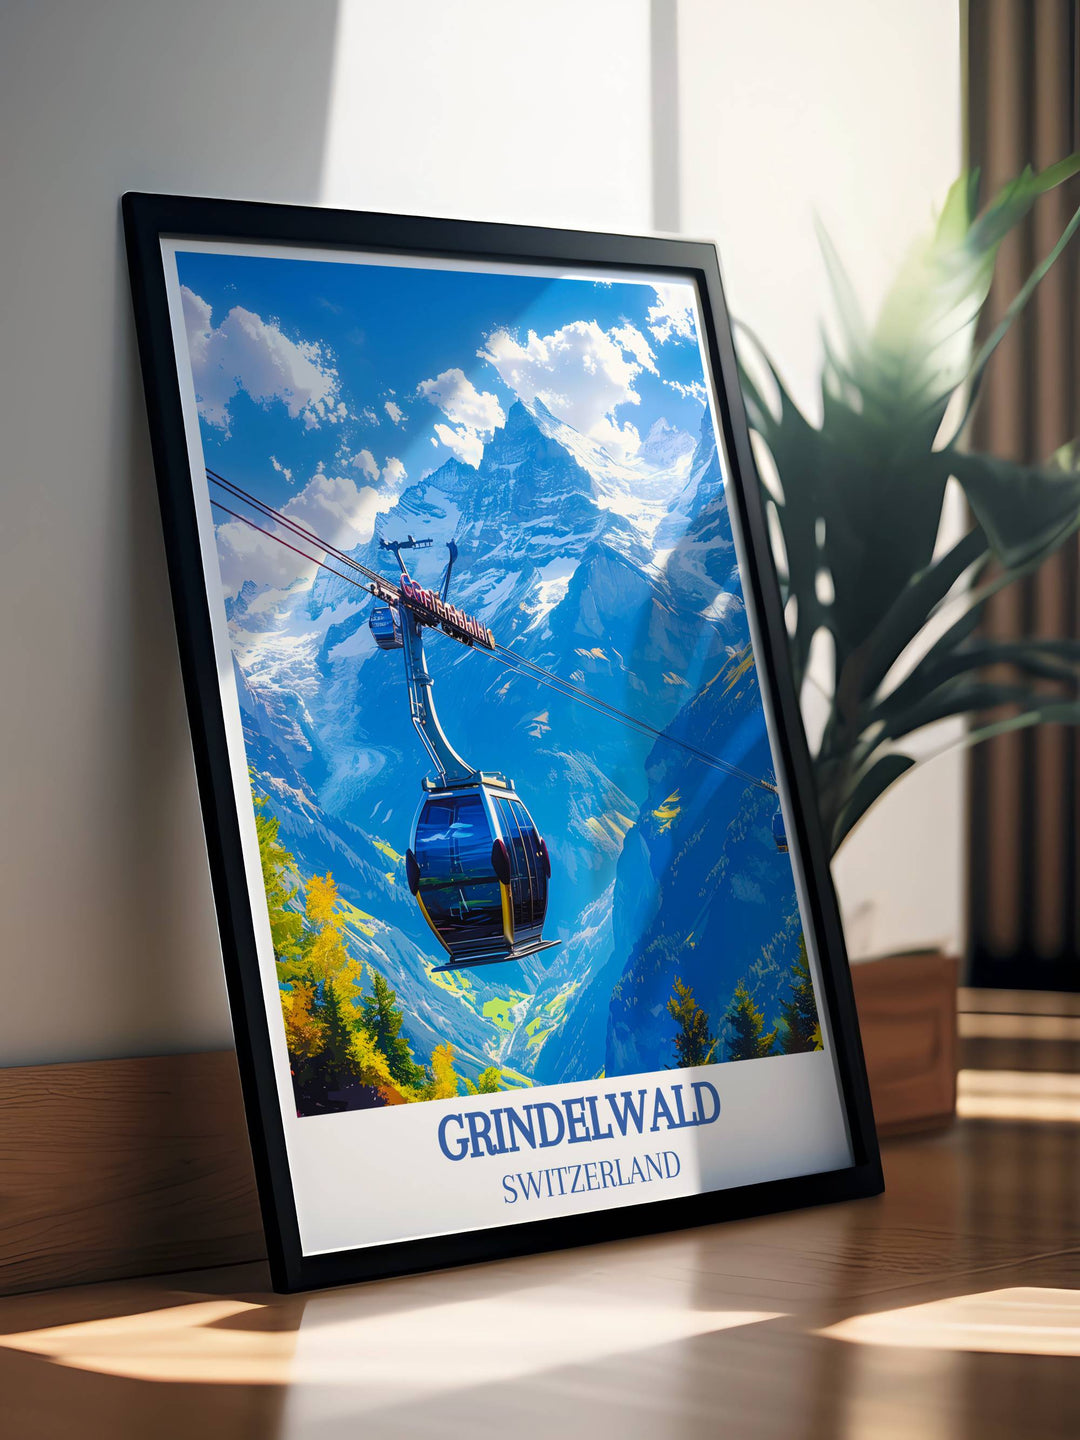 Springtime bloom with Grindelwald First gondola rising above flowering meadows, captured in a Swiss Alps print.